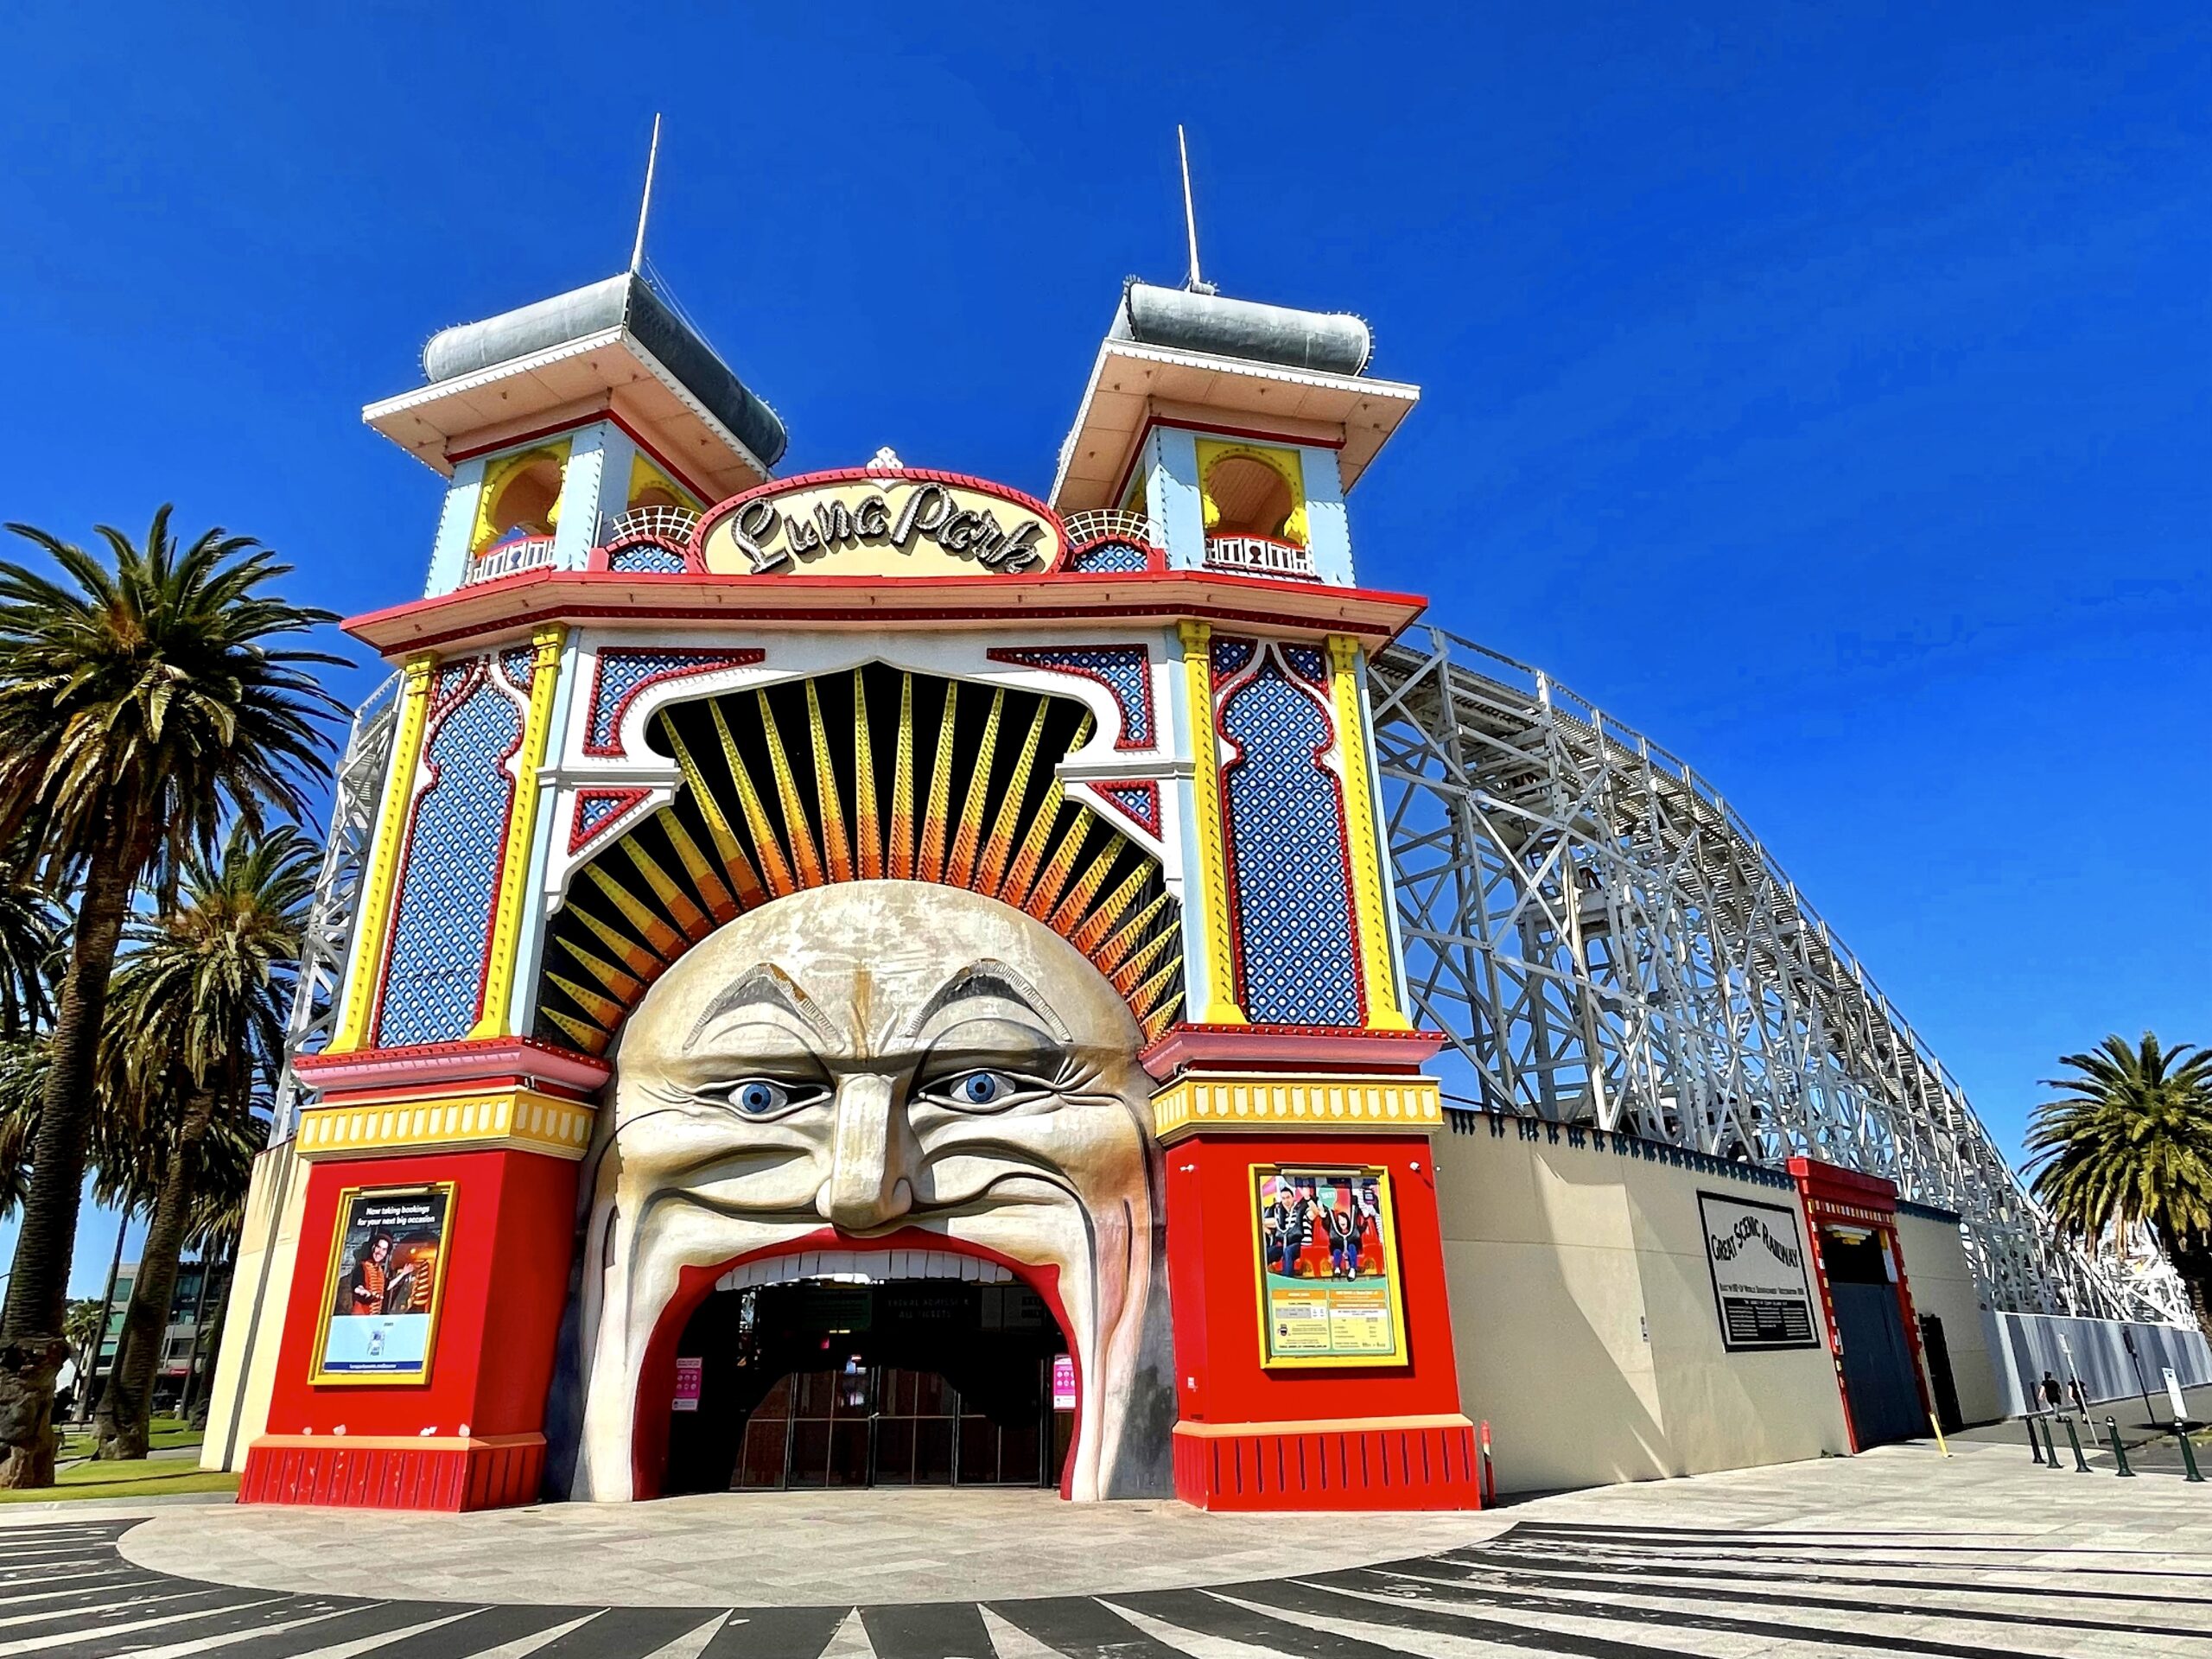 The retro, Art-Deco-themed entrance to St Kilda's Luna Park, featuring an enormous face of a clown with a door providing the entrance into the amusement park. The tracks of a wooden roller coaster form the perimeter of the park.